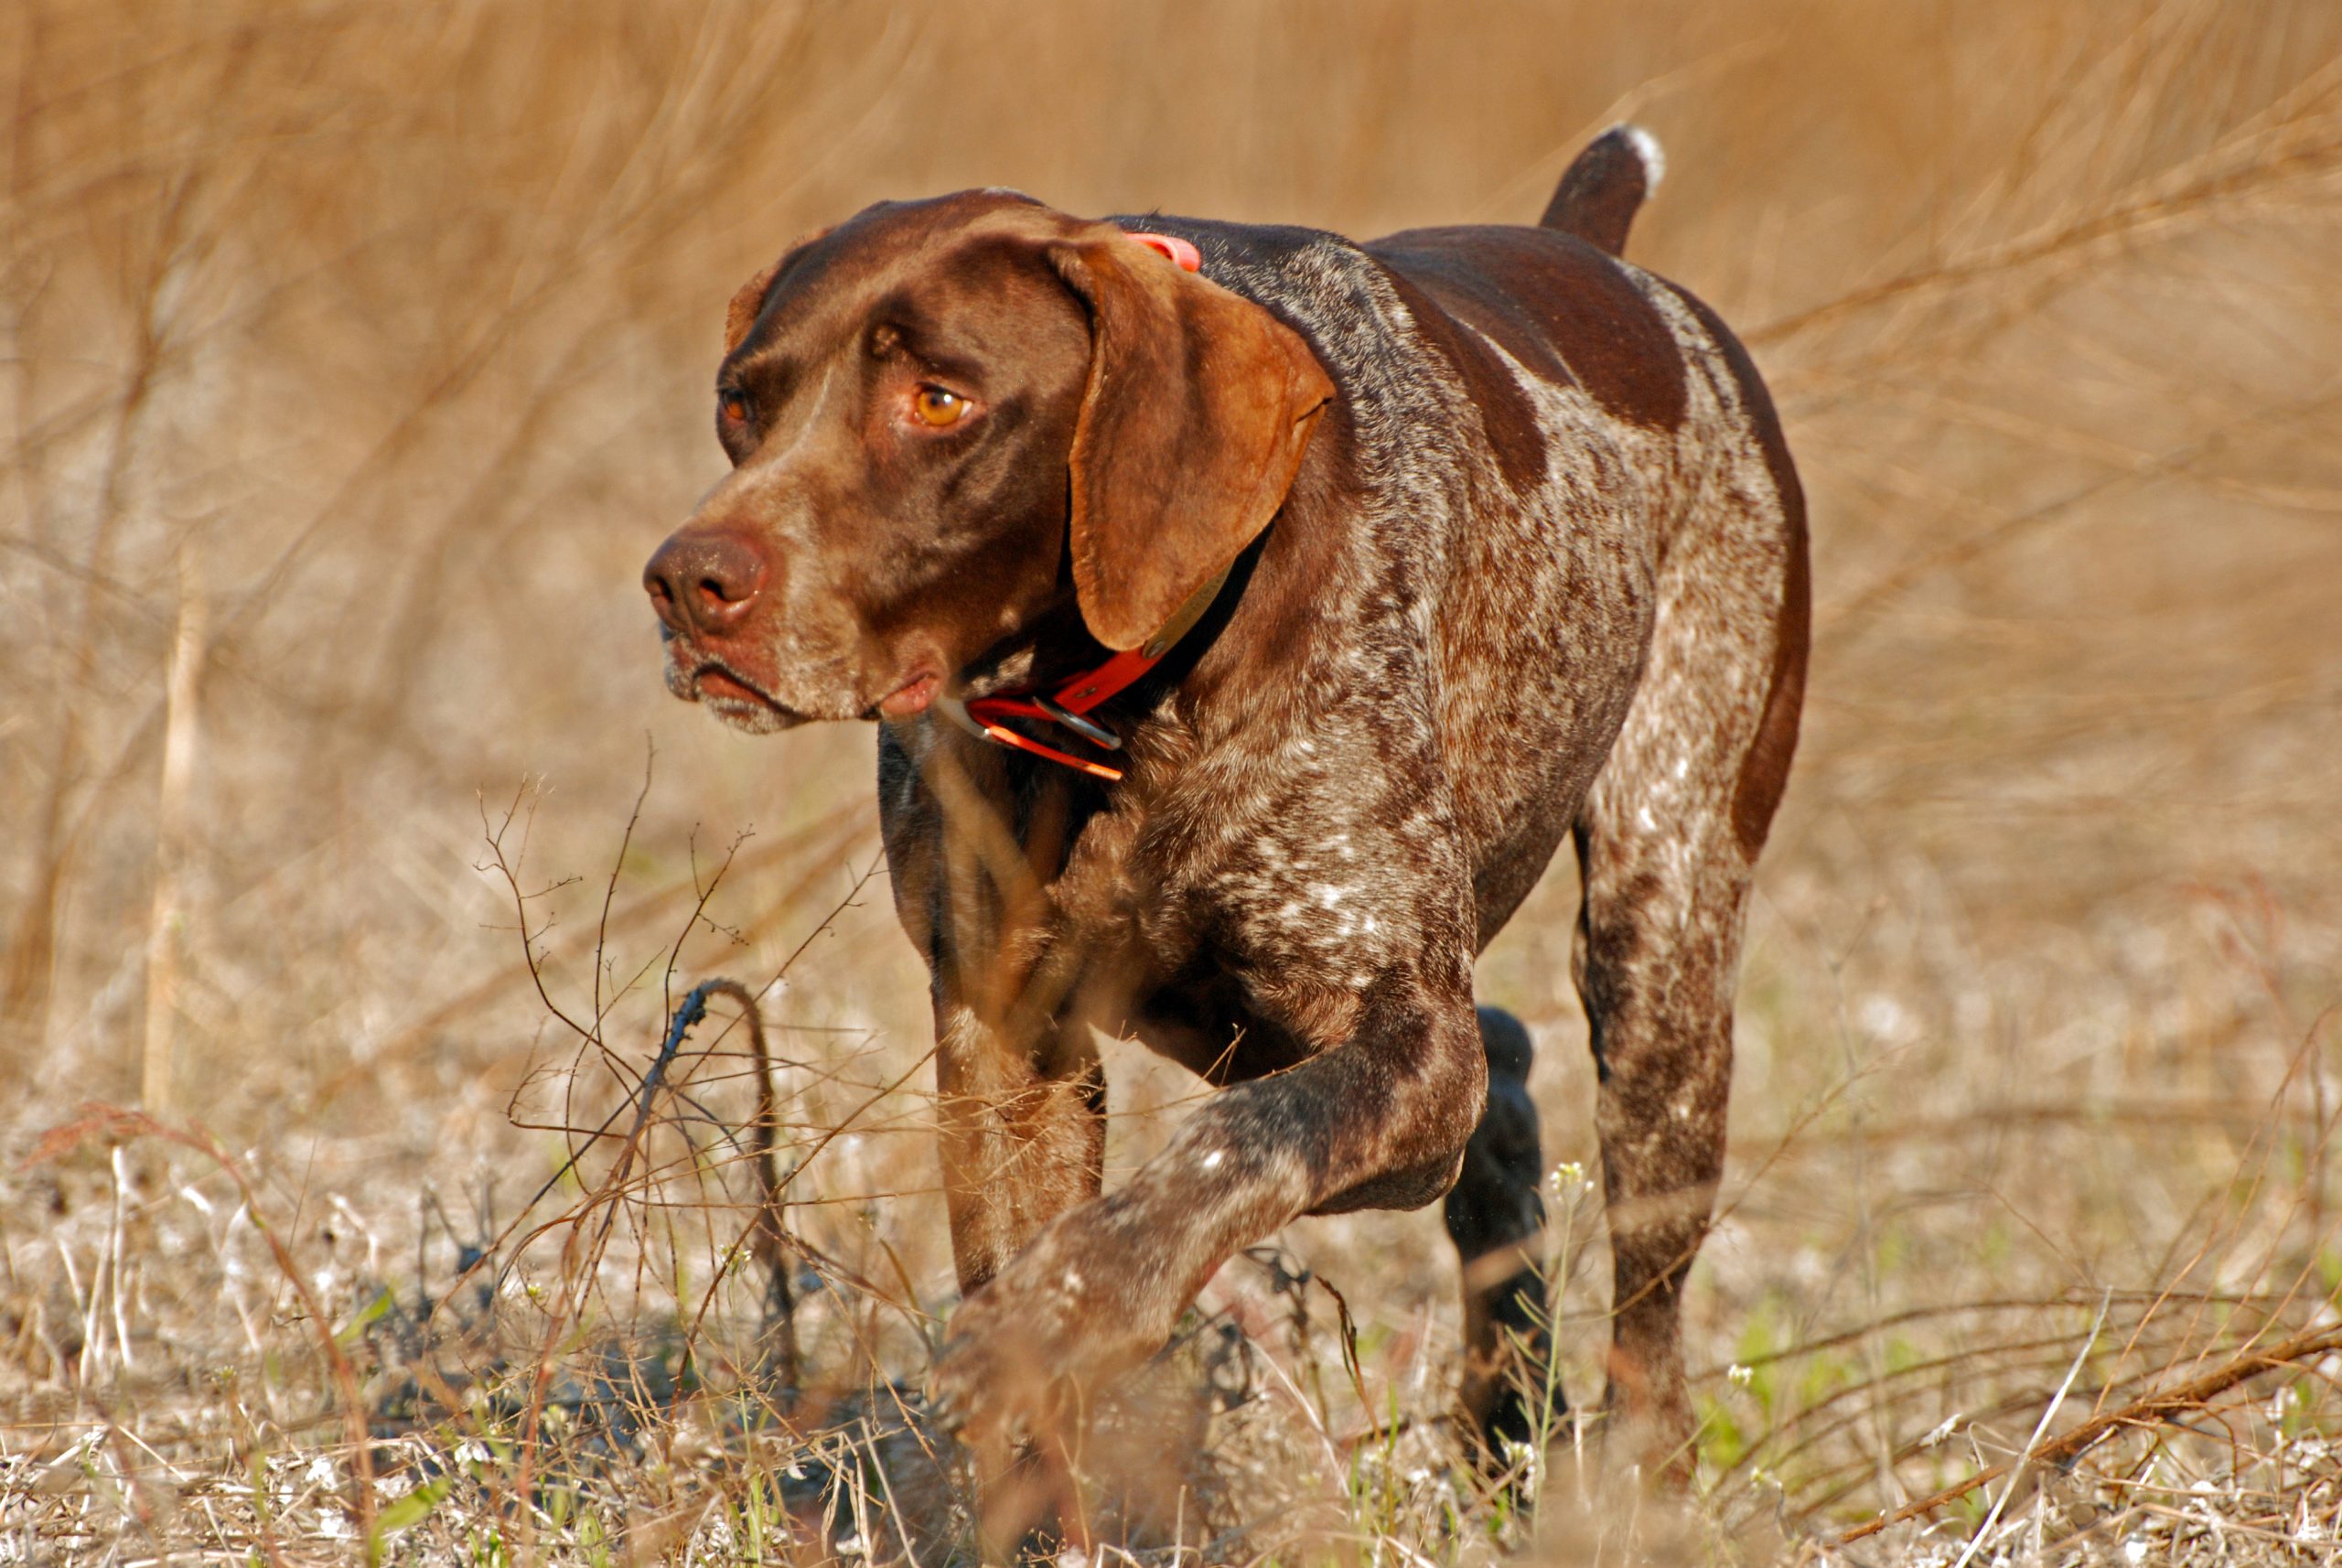 The German shorthaired pointer is a very popular all-around hunting dog. They point, retrieve, track deer, and can hunt all day. 